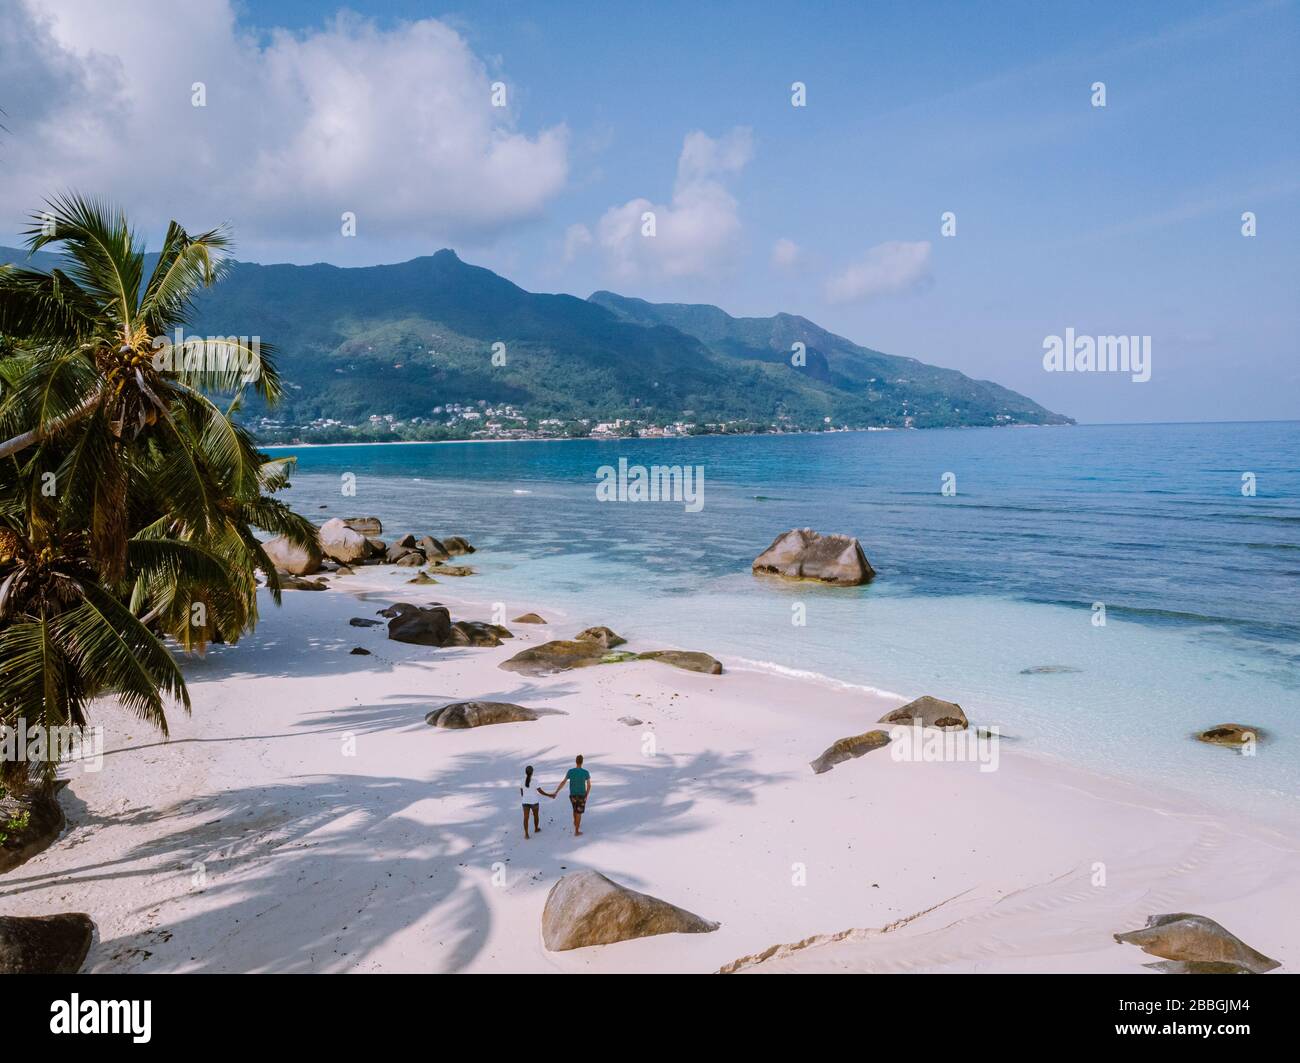 Tropical white beach at Praslin island Seychelles, happy Young couple man and woman during vacation Holiday at the beach relaxing under a palm tree Stock Photo